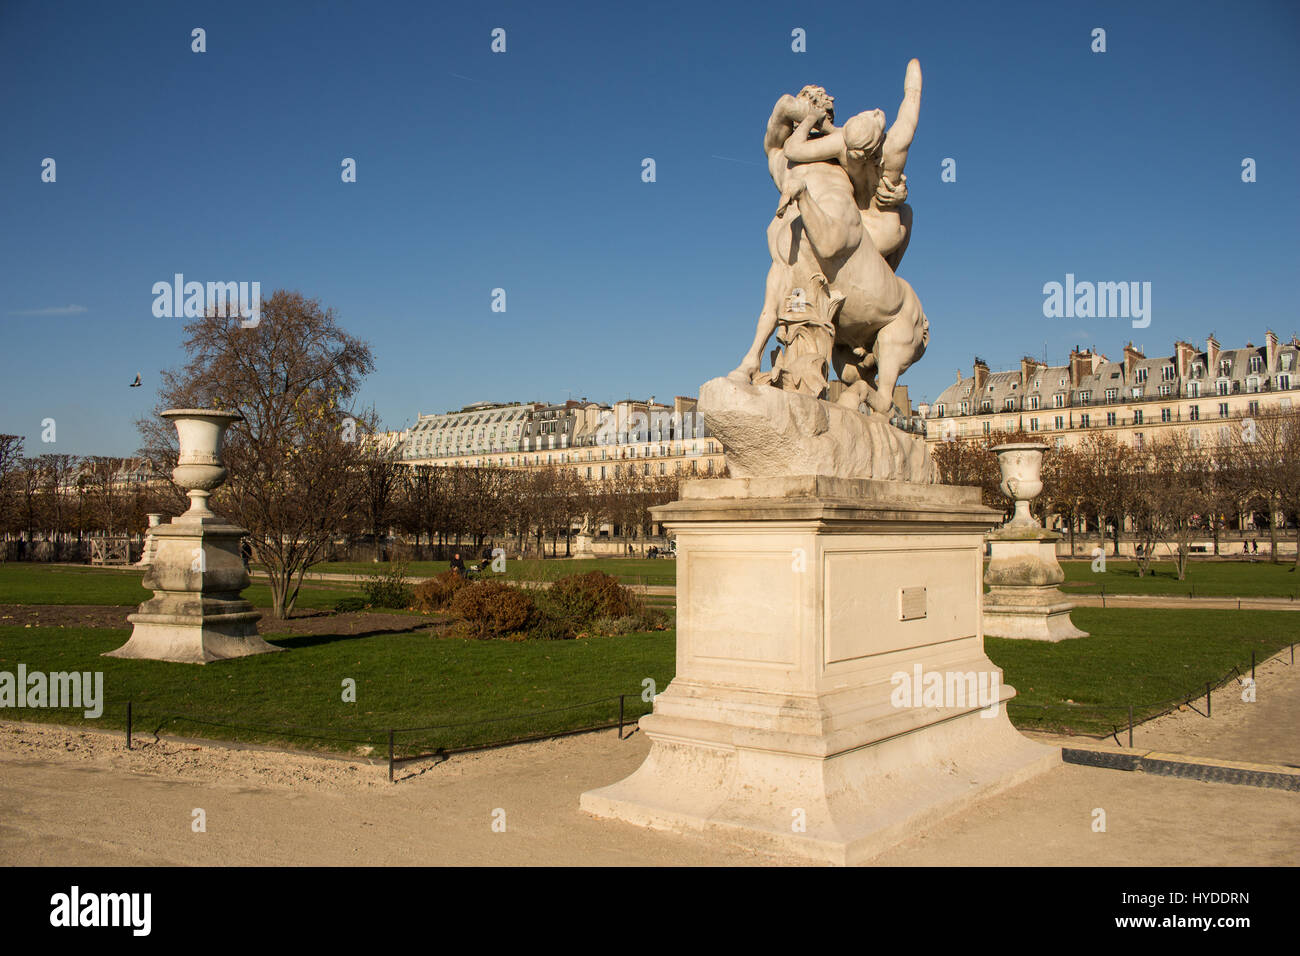 Statue on a sunny day in jardin des tuileries between musee du louvre and champs elysees, Paris France Stock Photo